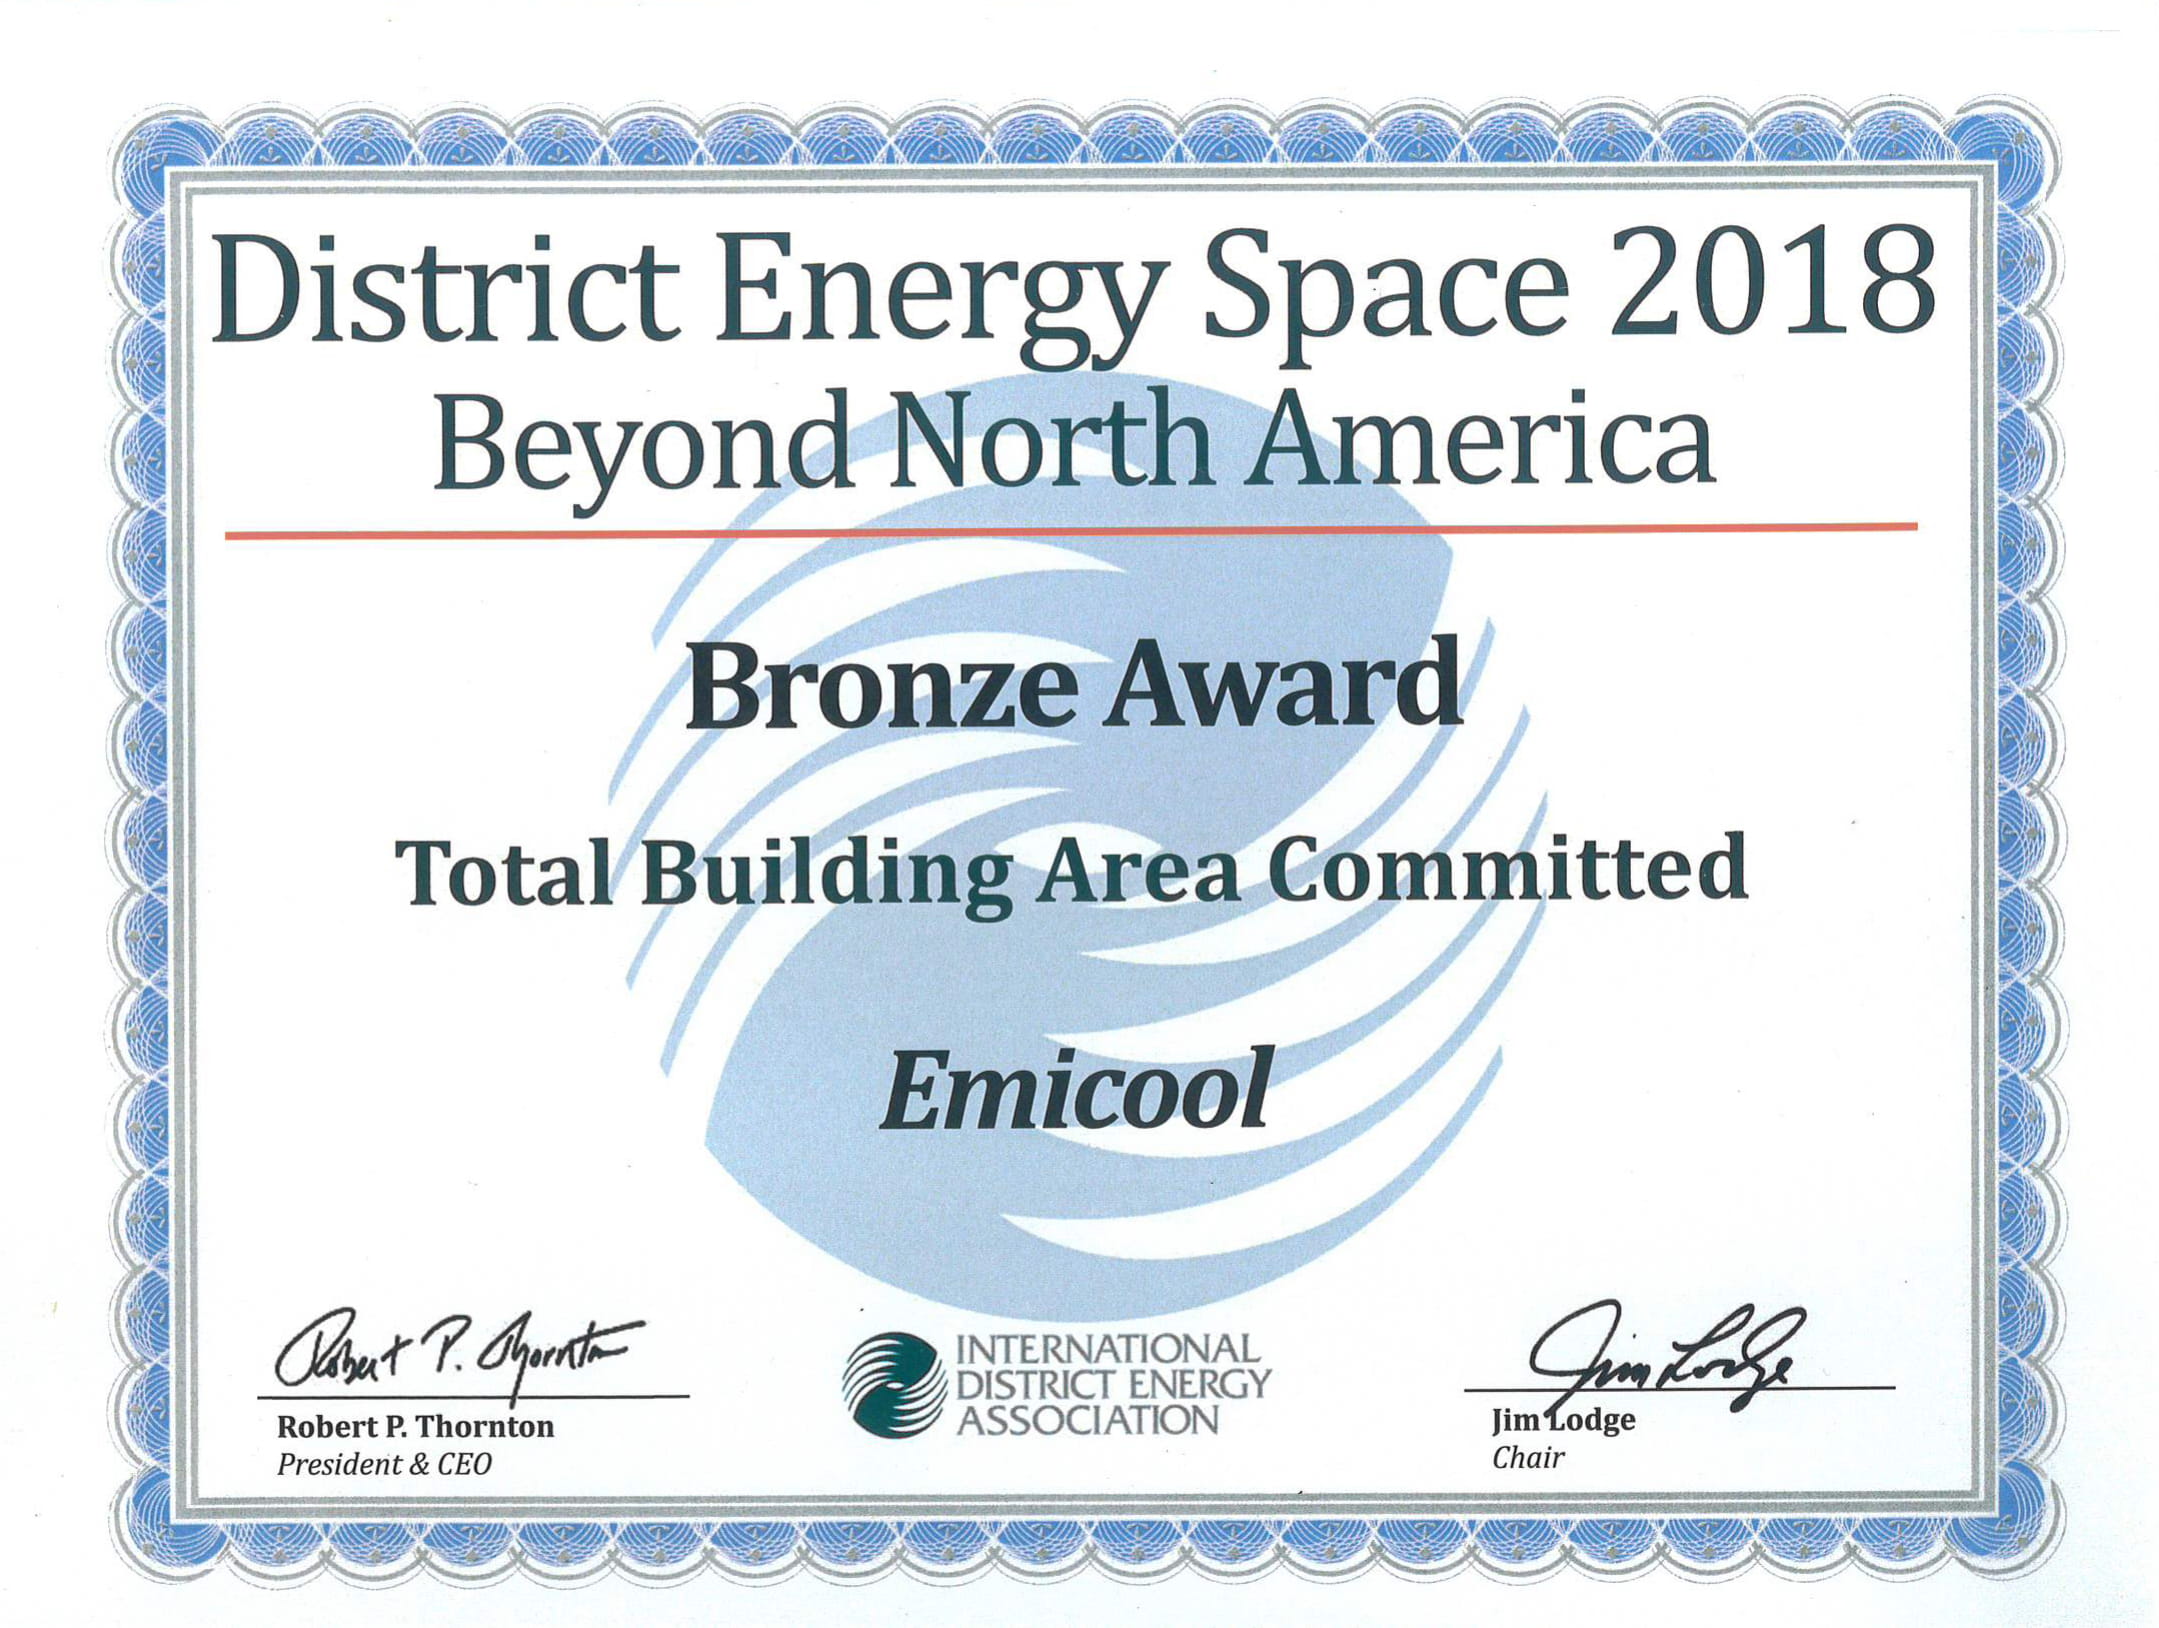 Bronze Award Number of Buildings Committed